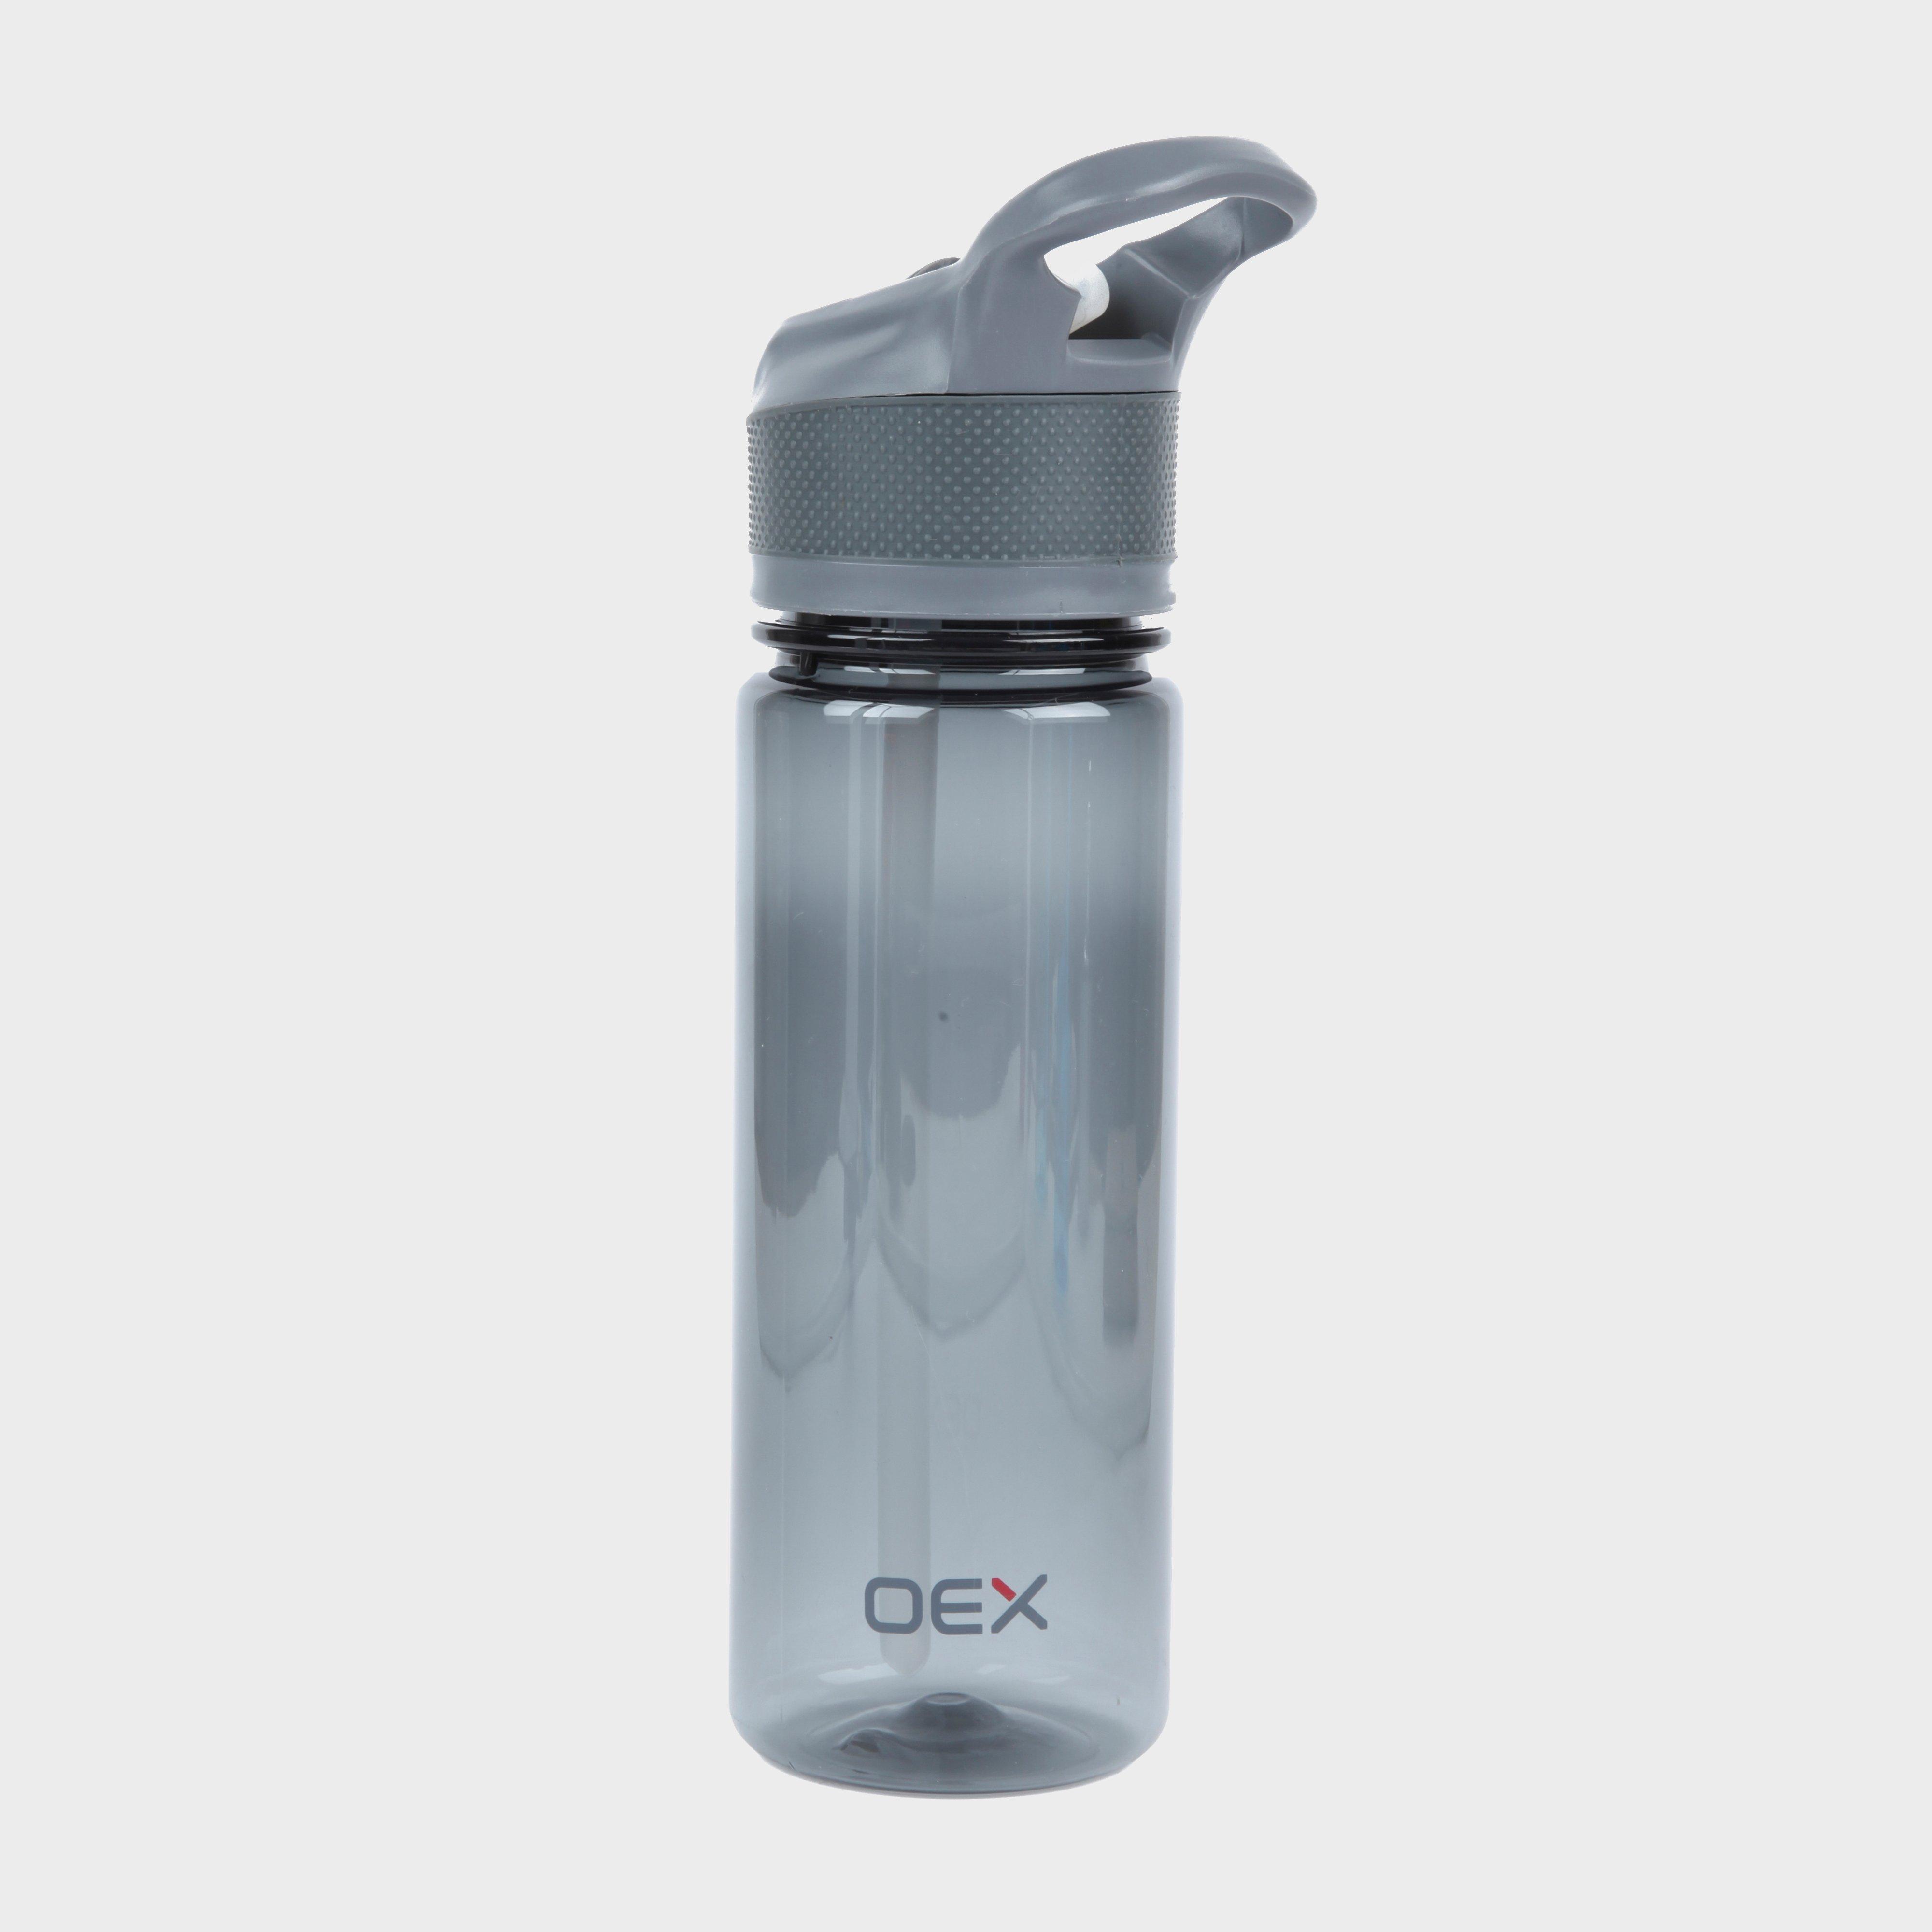 Image of Oex Spout Water Bottle (700Ml) - Grey/Dgy, Grey/DGY